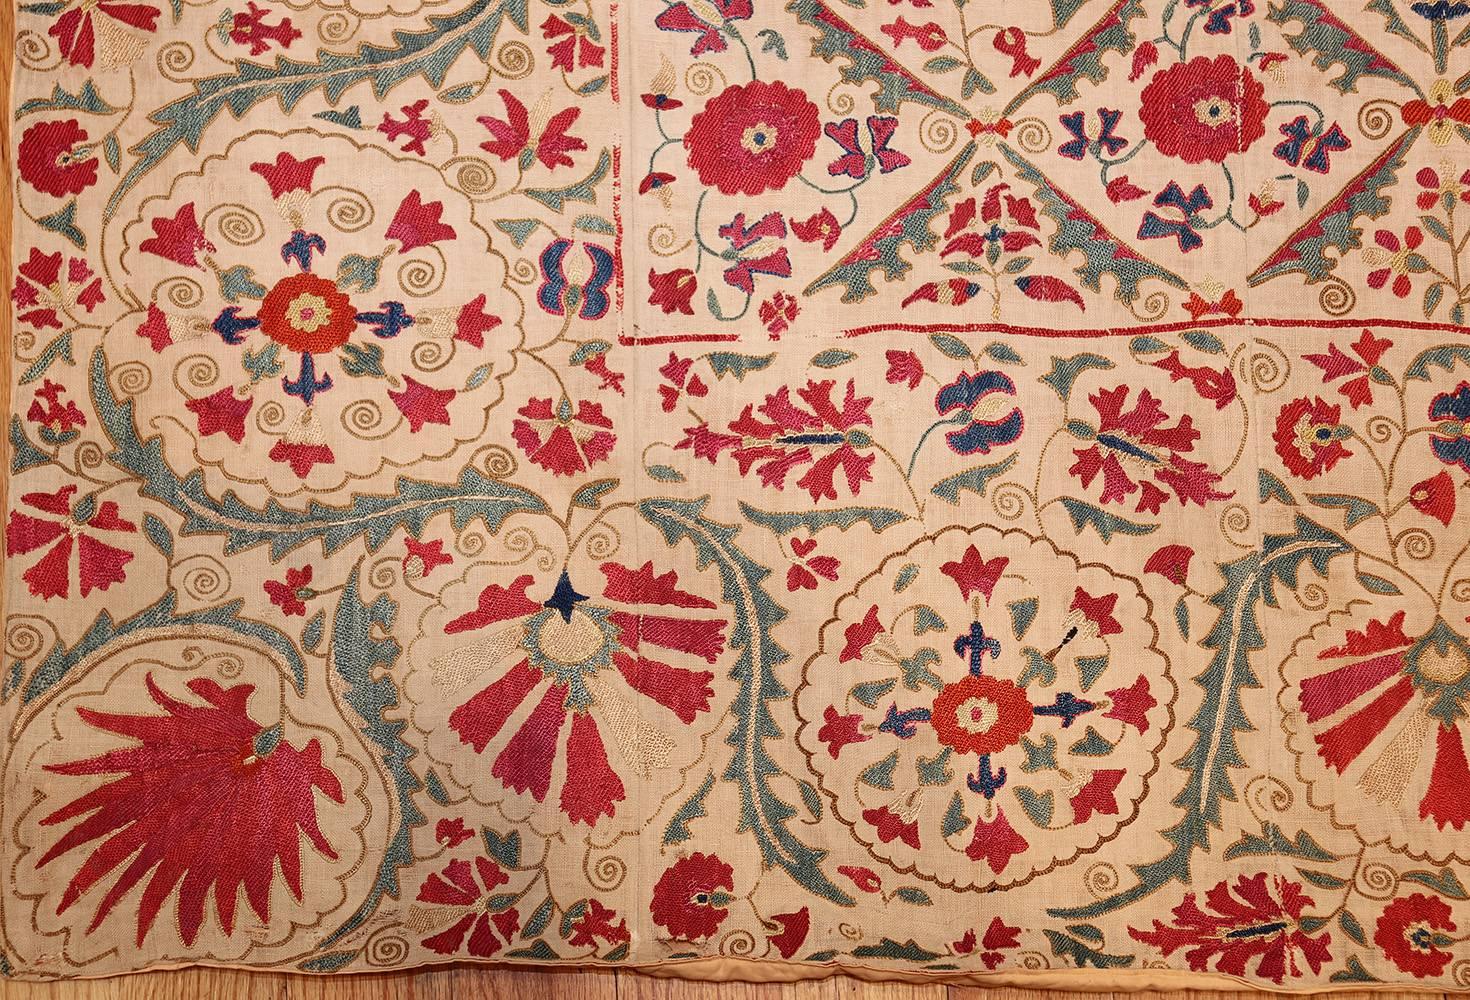 Early 19th Century Suzani Uzbek Textile. Size: 5 ft 4 in x 5 ft 7 in  2